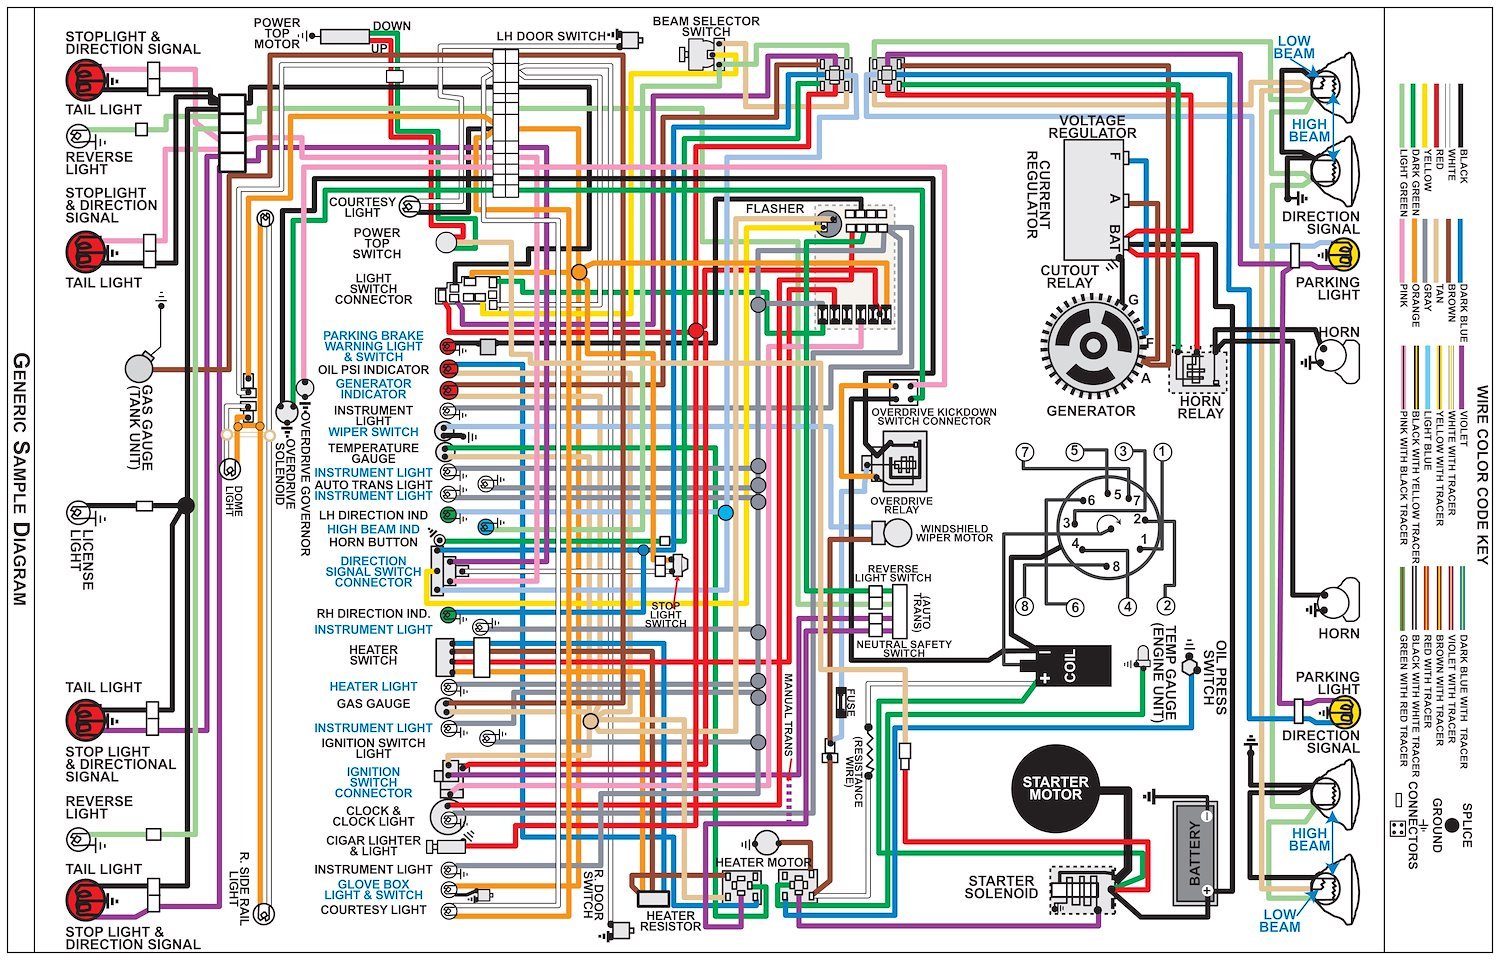 Wiring Diagram for 1966 Chevy Belair, Biscayne, Caprice,